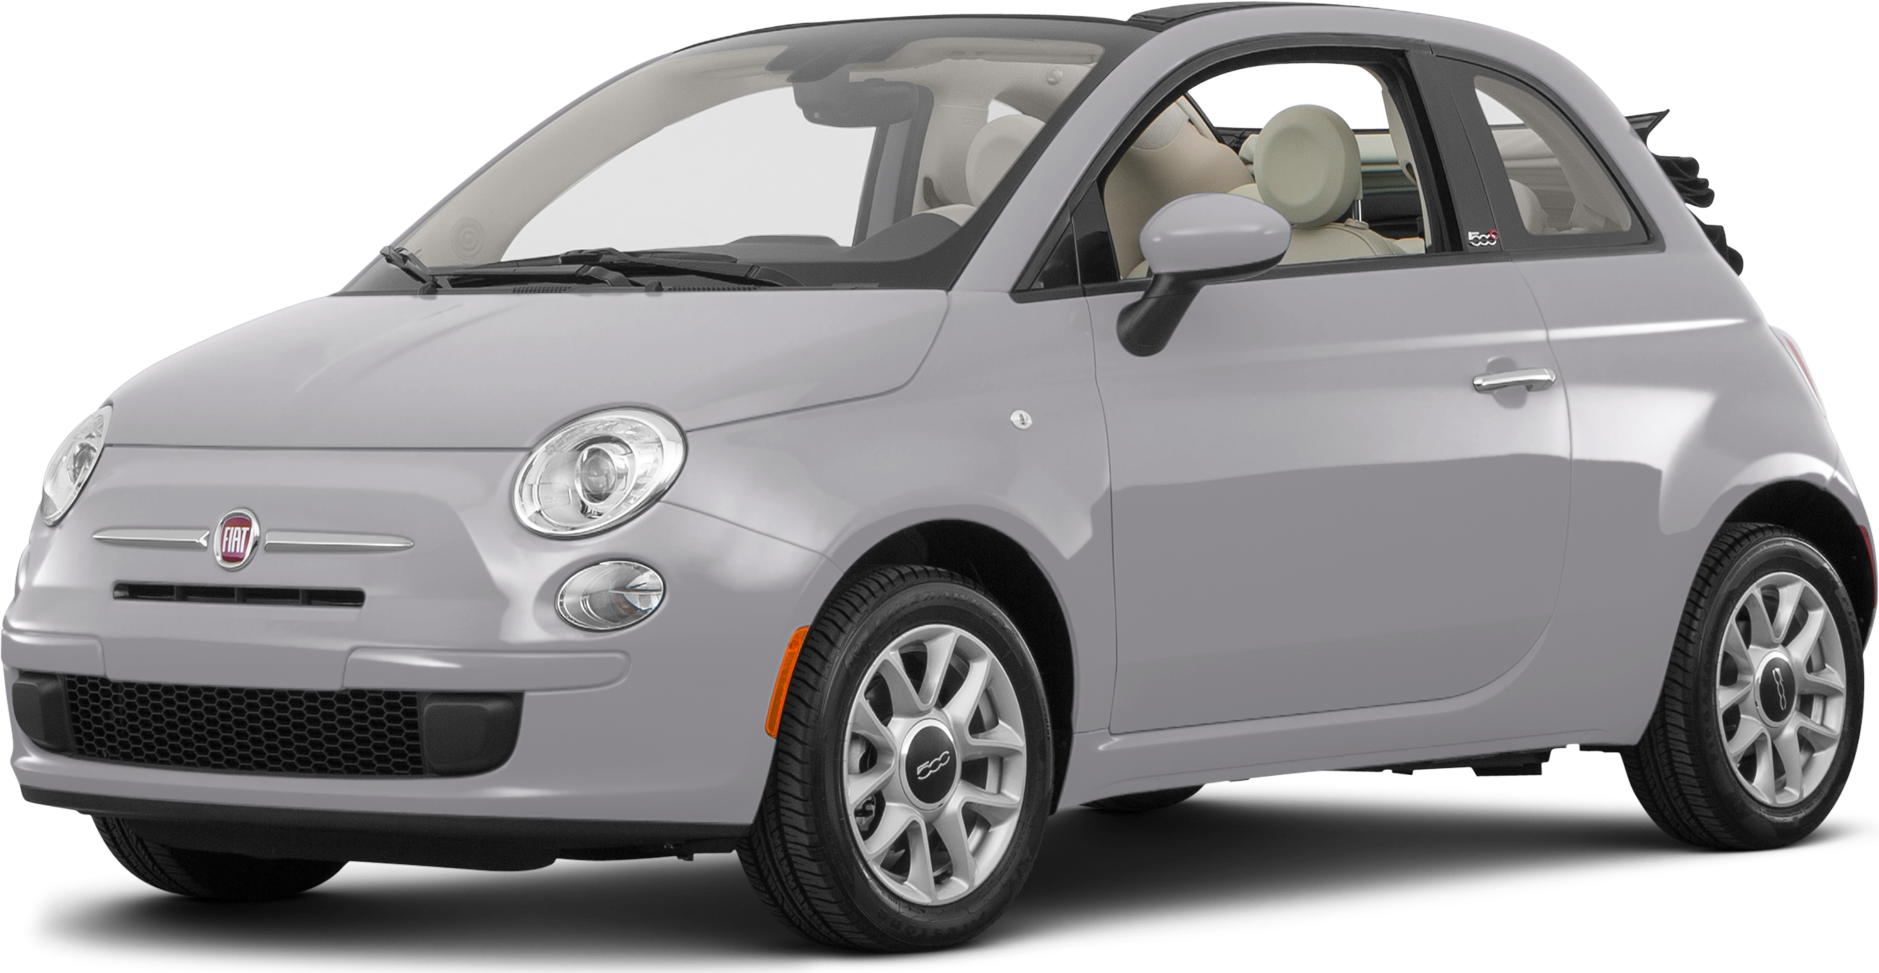 Fiat White Classic HQ Image Free PNG Image. 